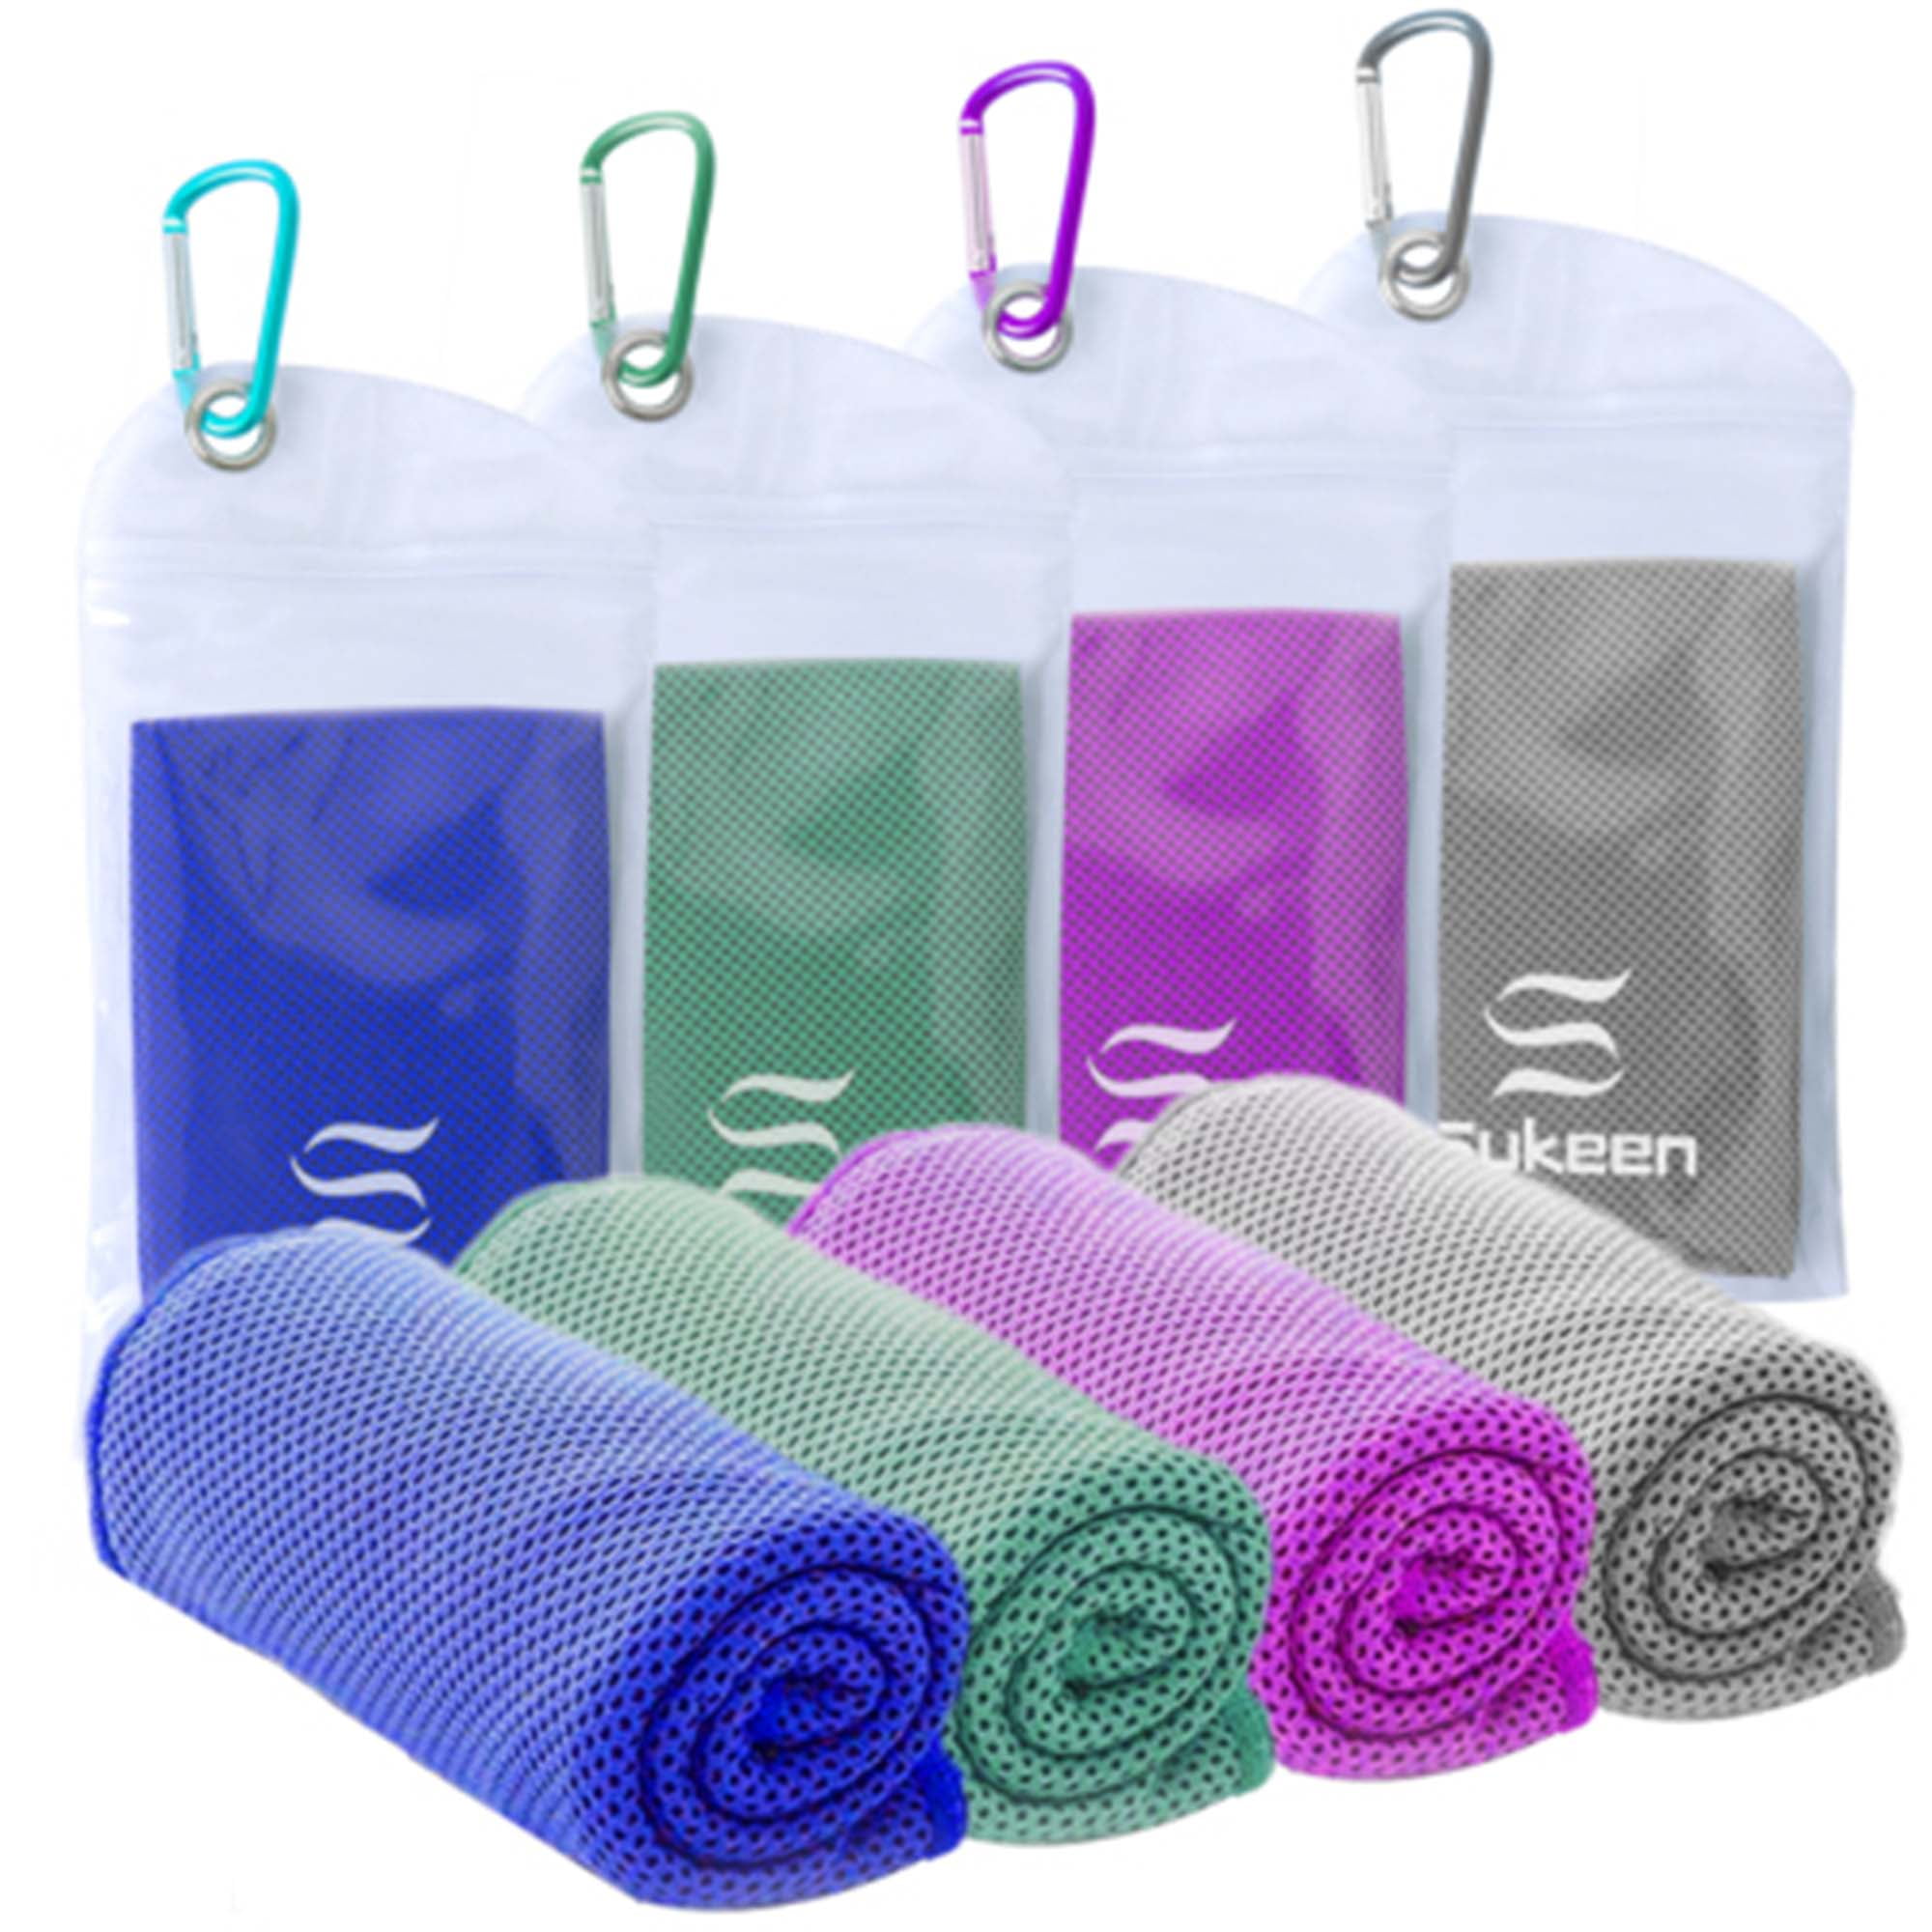 Buy 2 get 2 free ice Cooling Towel for Sports/Workout/Fitness/Gym